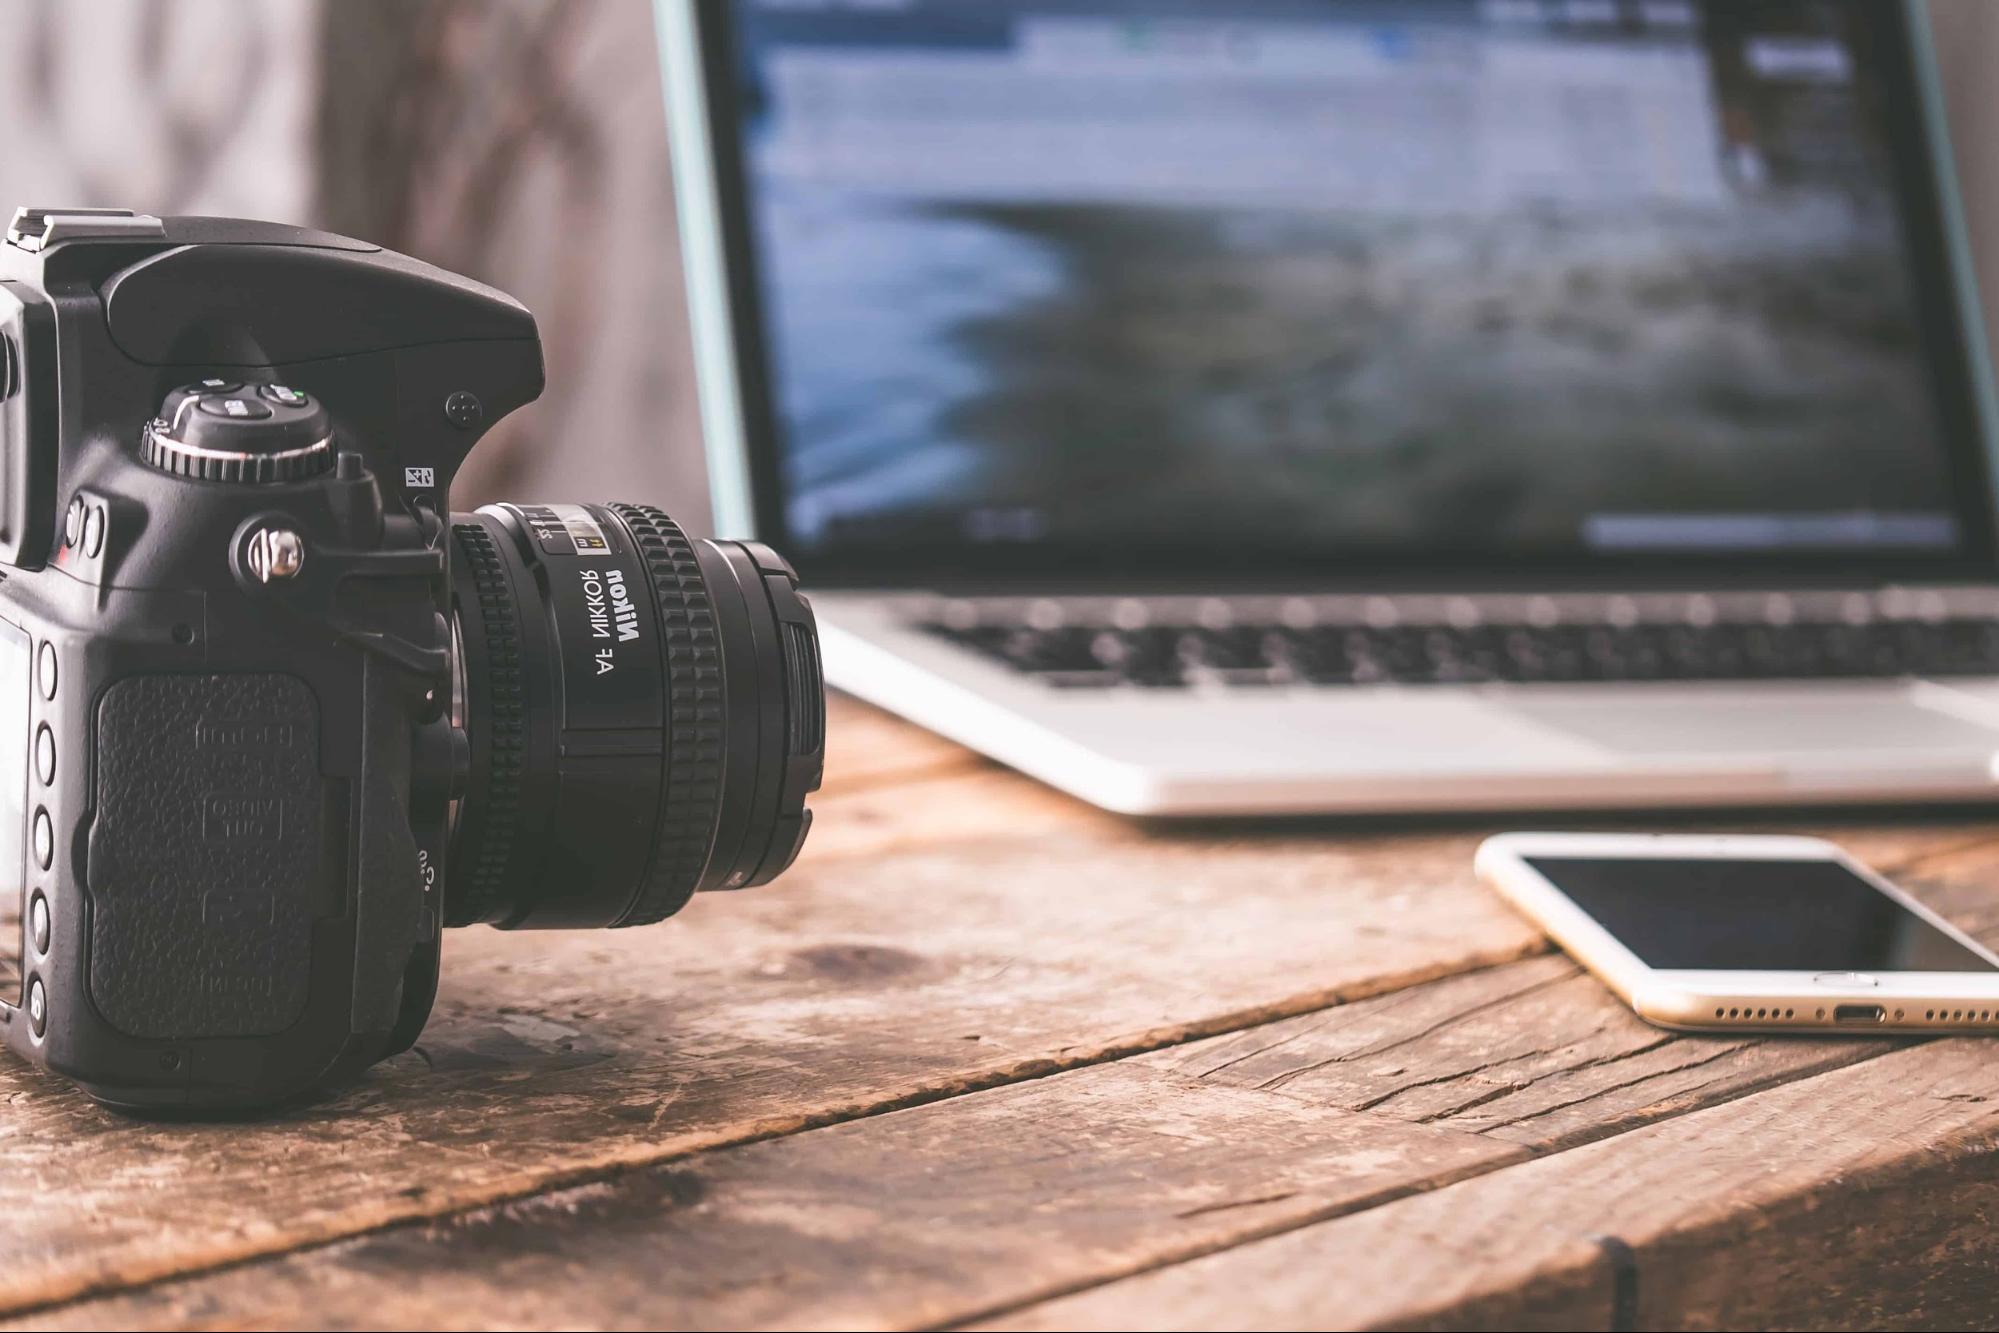 Trendy Video Marketing Use Cases for Your Brand